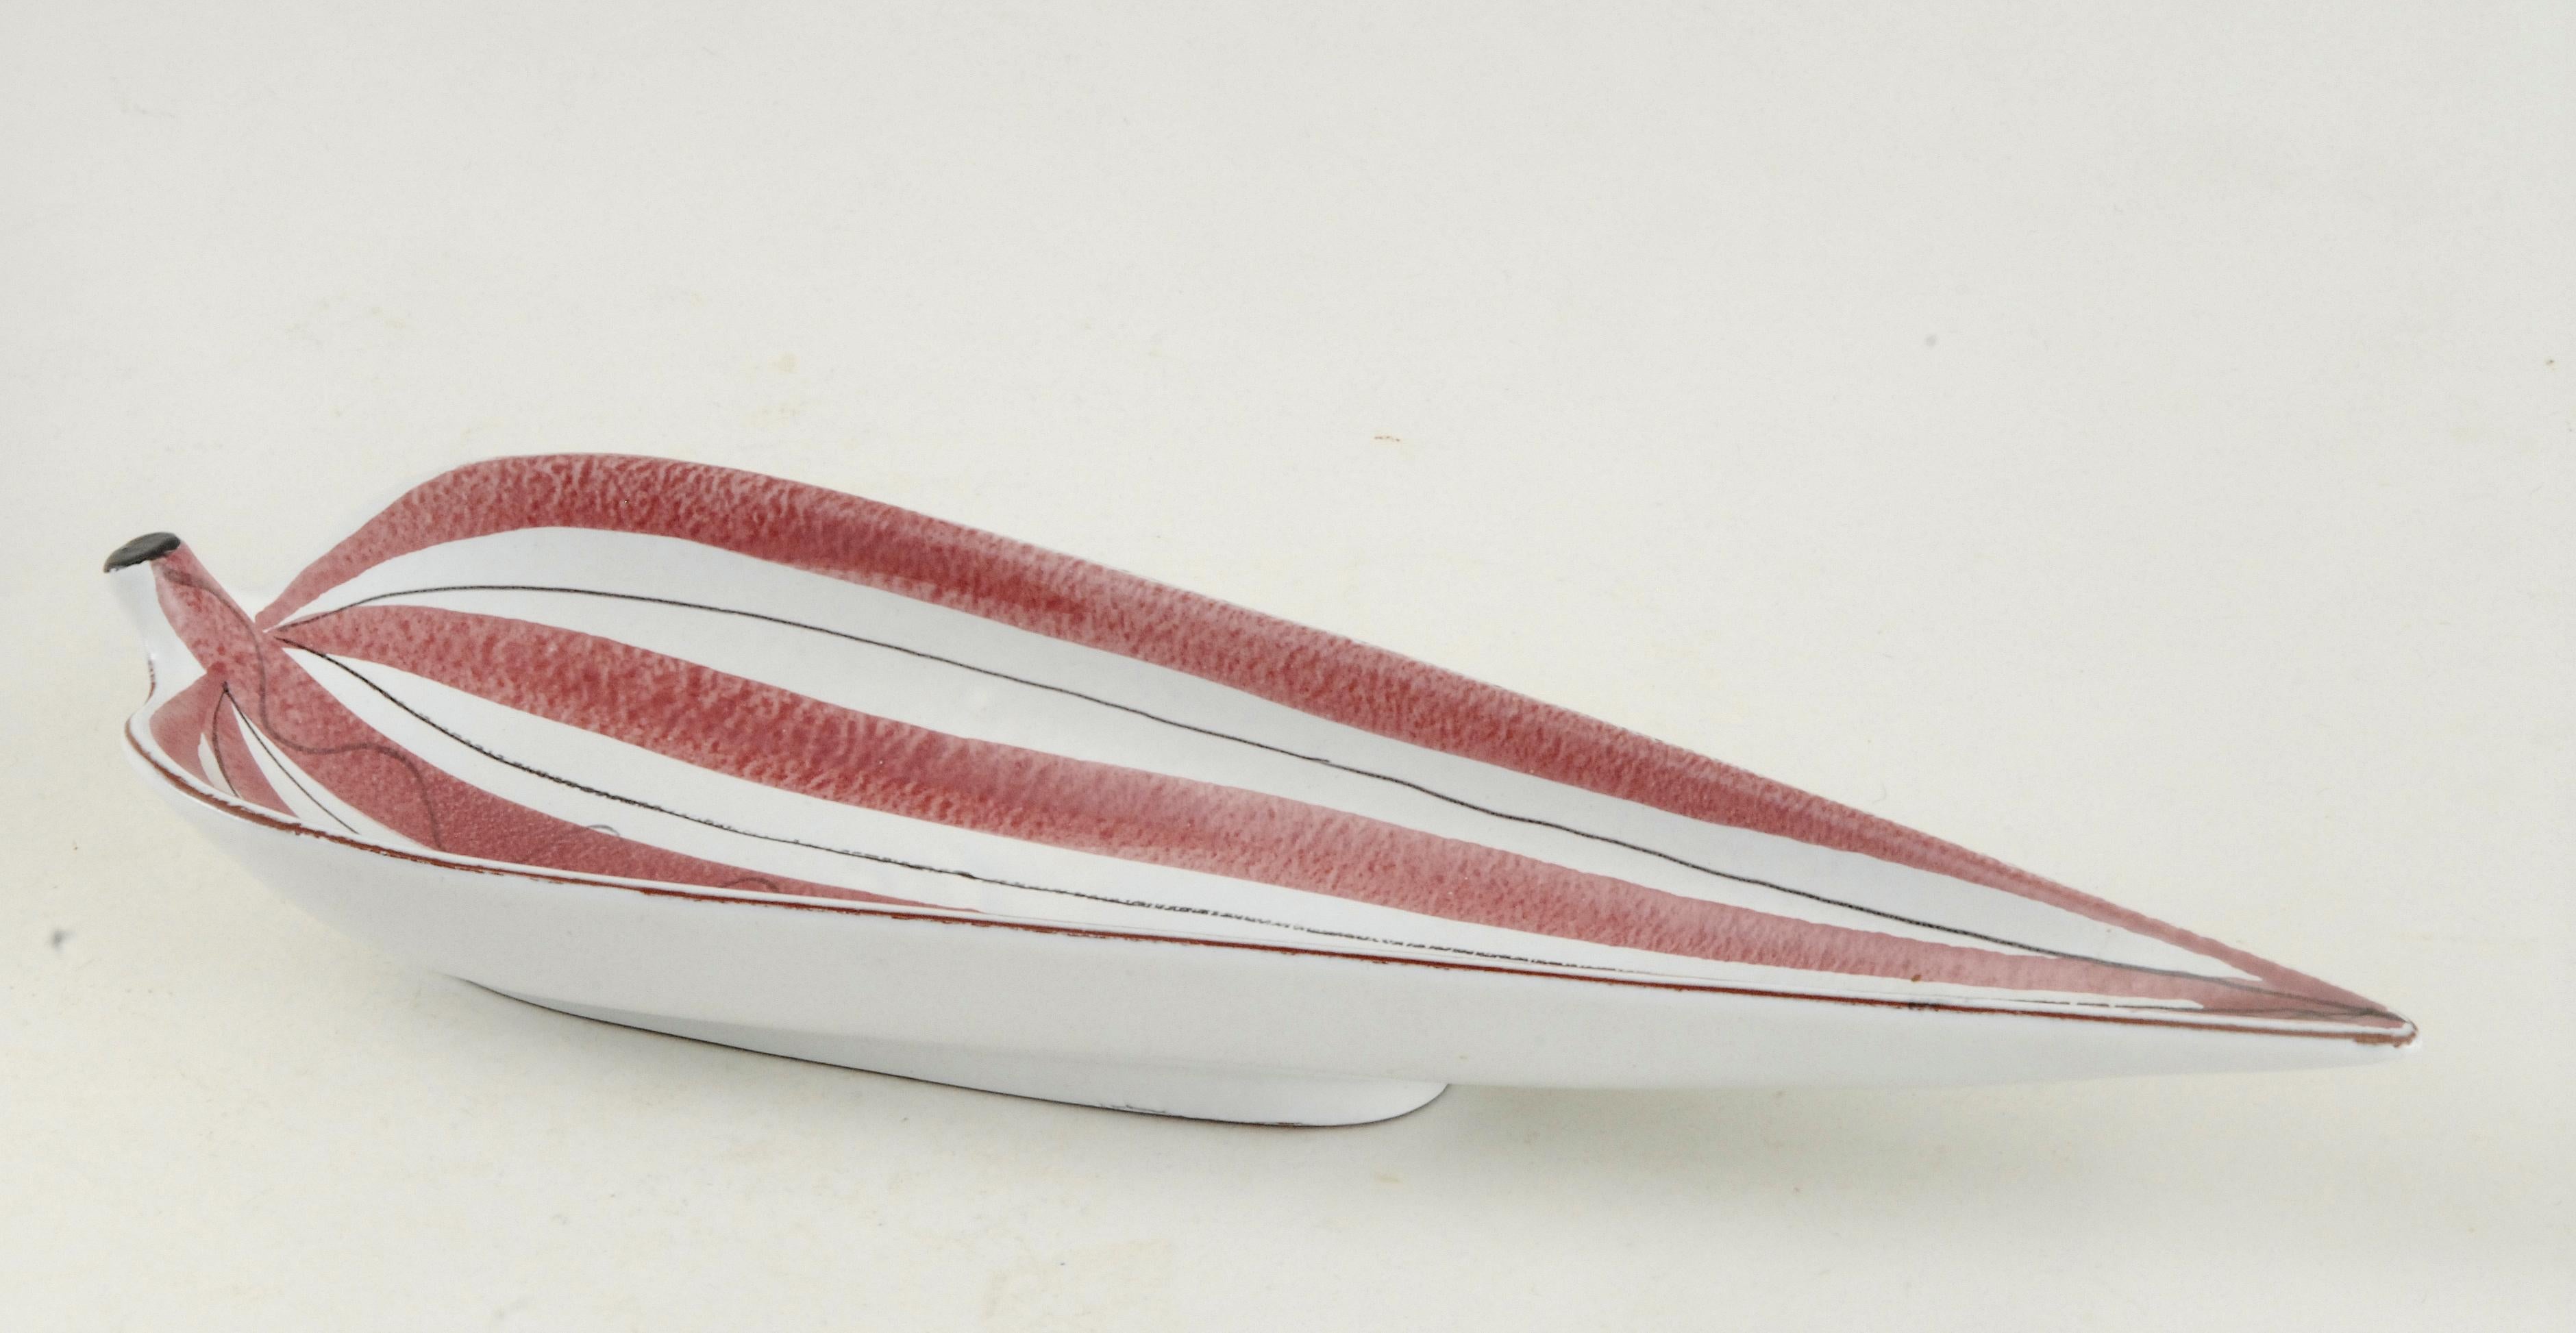 Stig Lindberg timeless design of a leaf dish for Gustavsberg painted in lovely soft maroon tones with a flawless semi matte glaze, fully signed to the bottom, circa 1950.